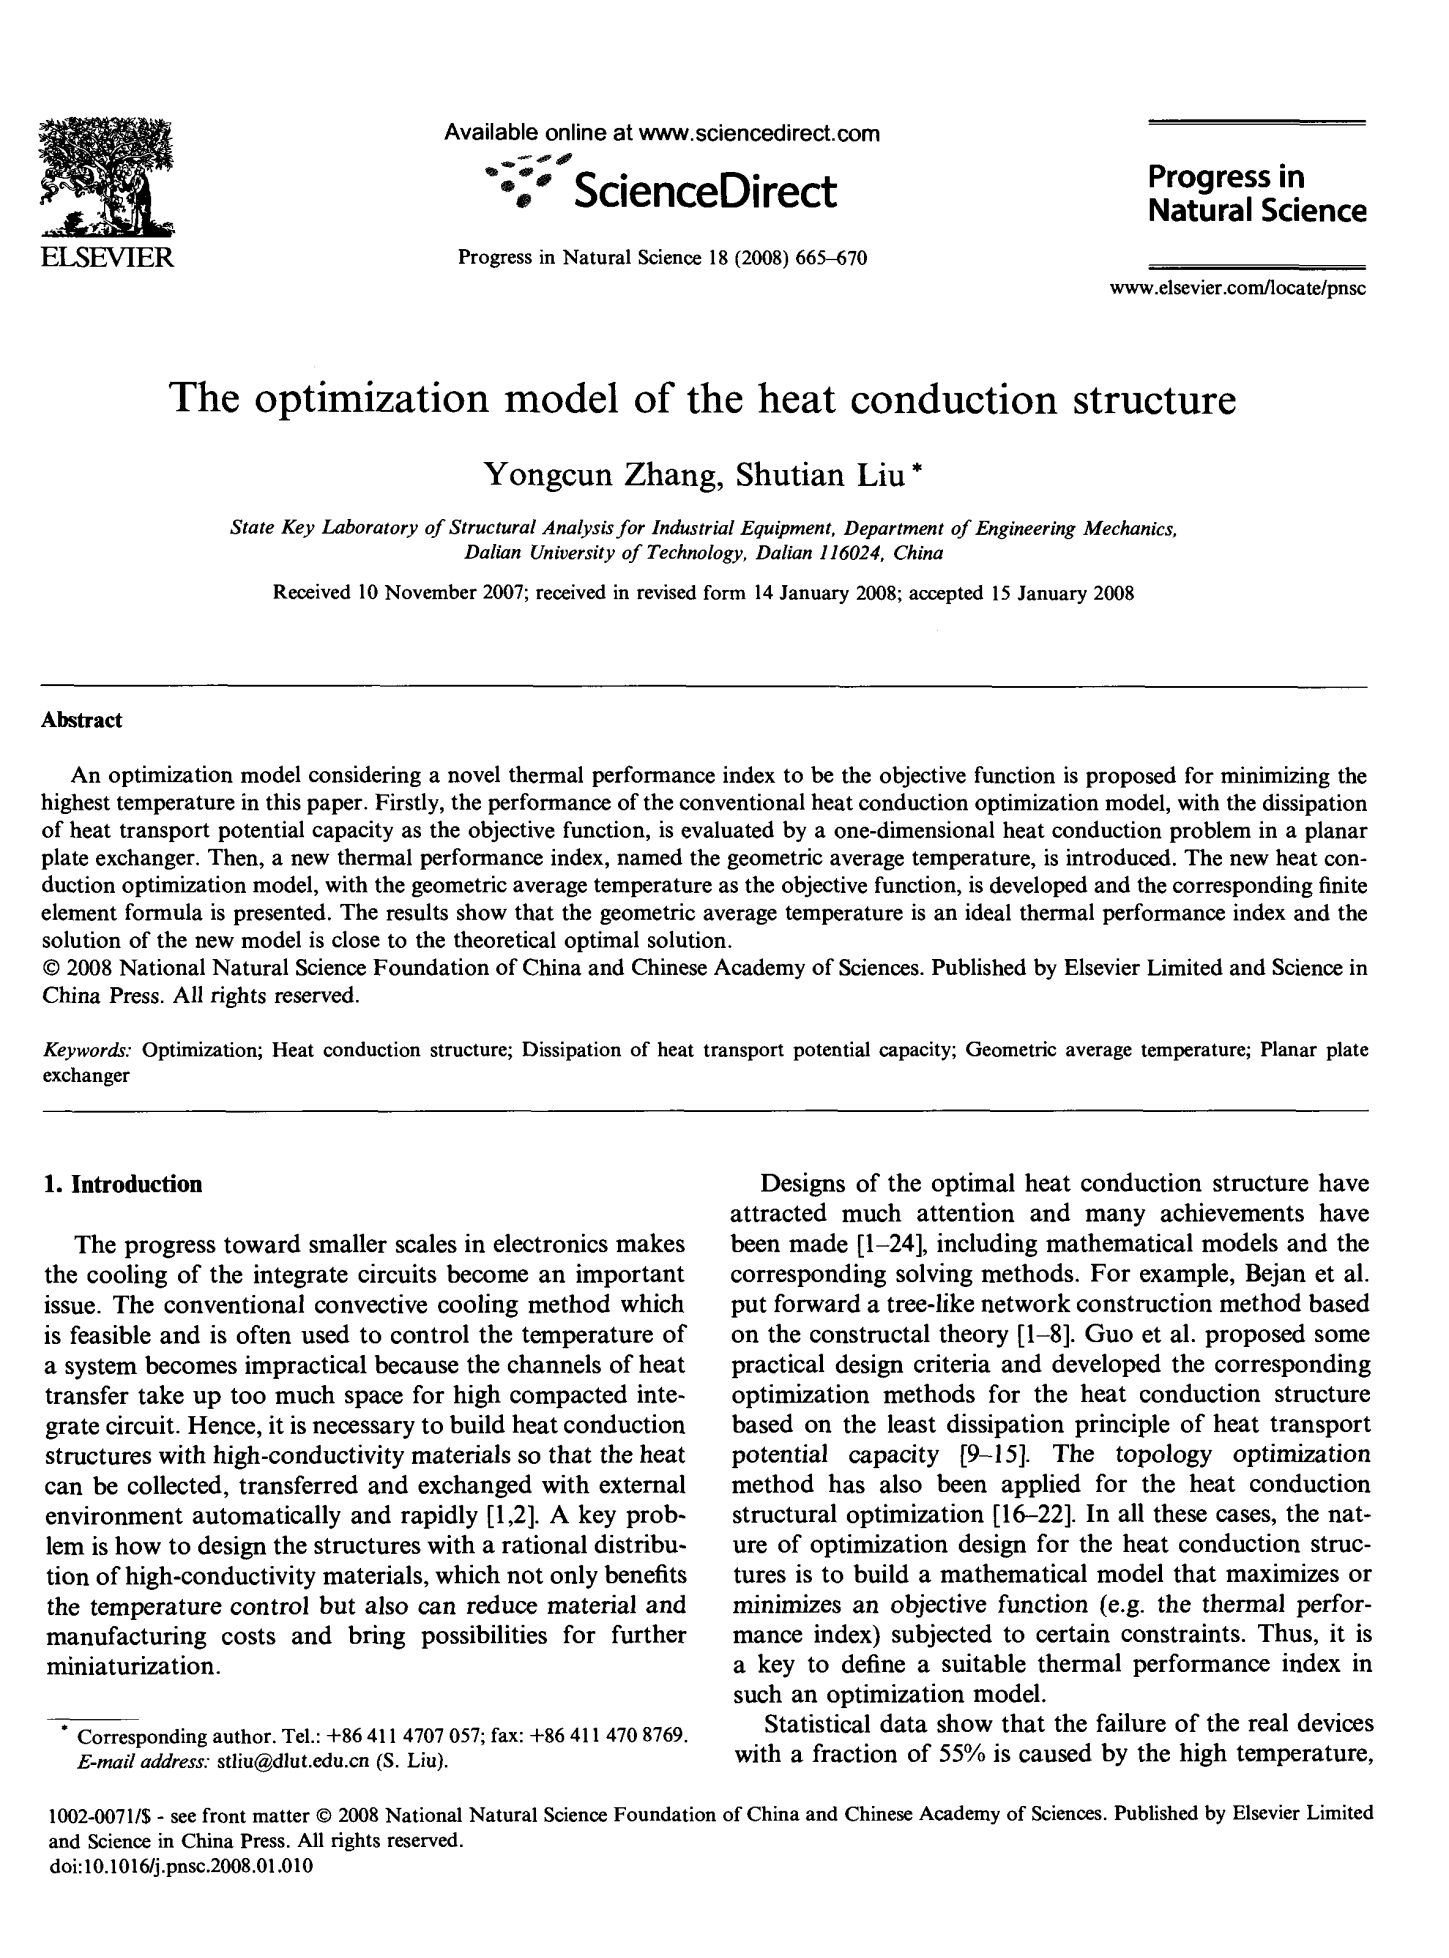 The optimization model of the heat conduction structure